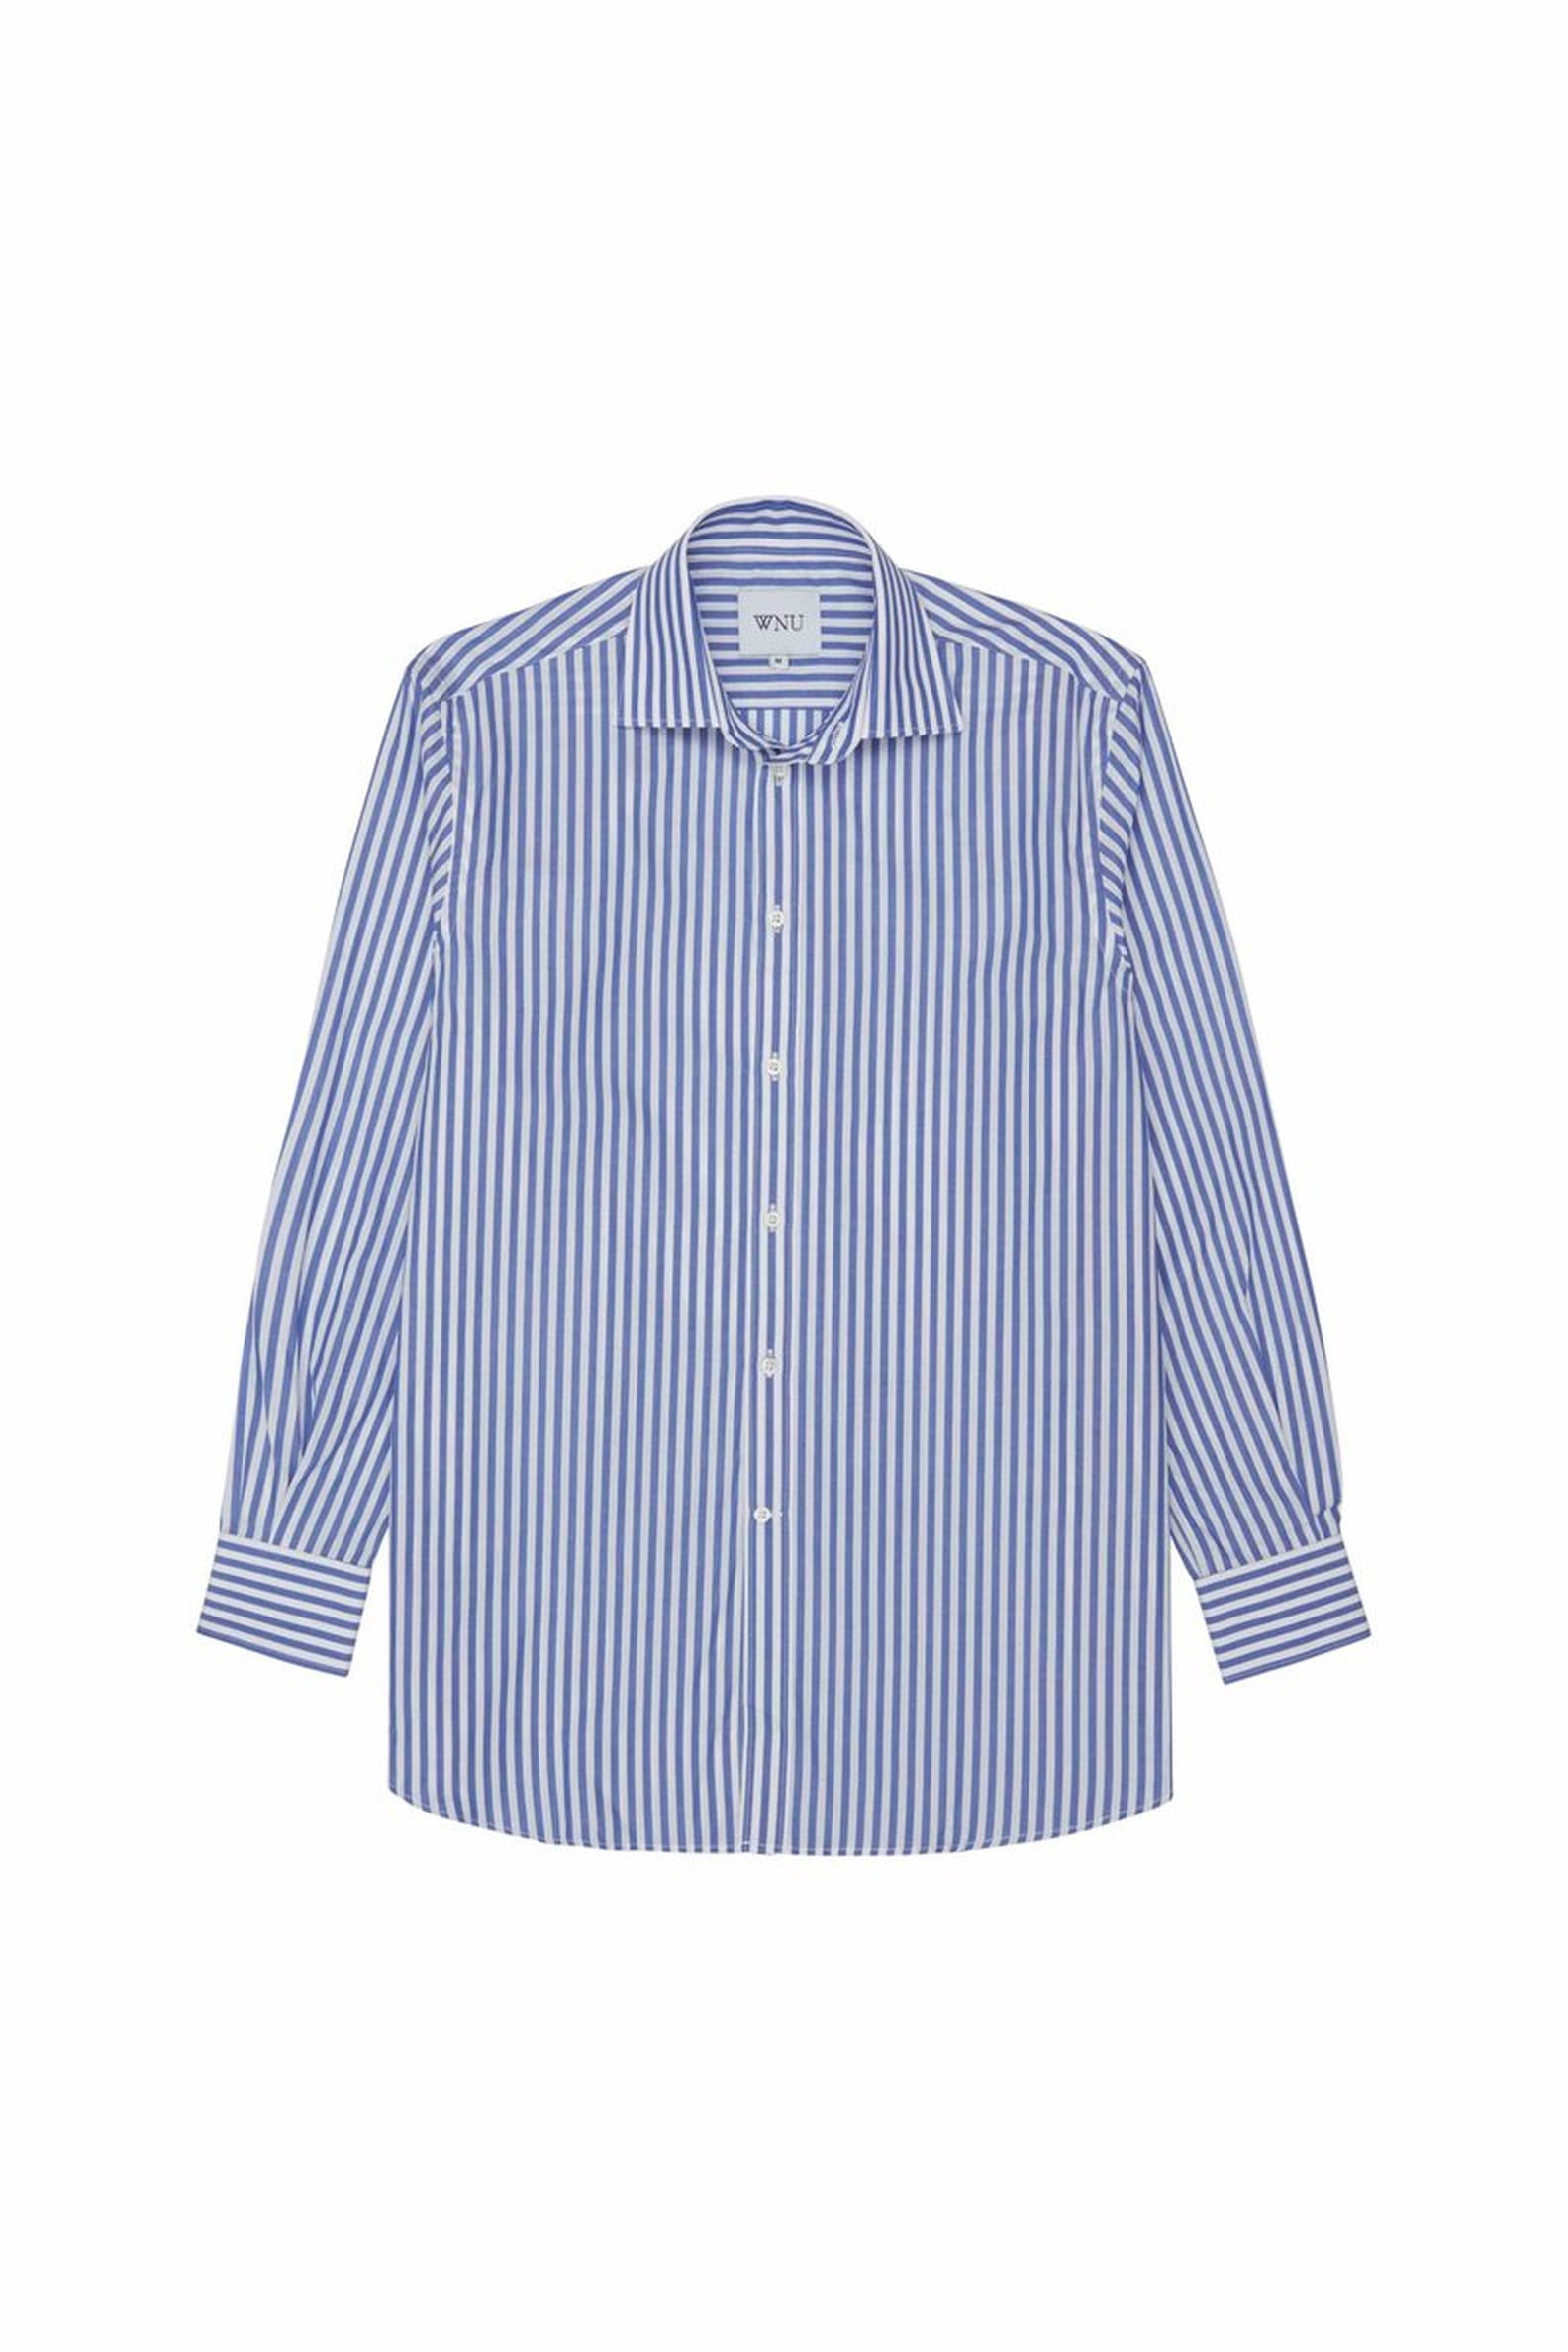 Meghan Markle's Blue Stripe Shirt by With Nothing Underneath | POPSUGAR ...